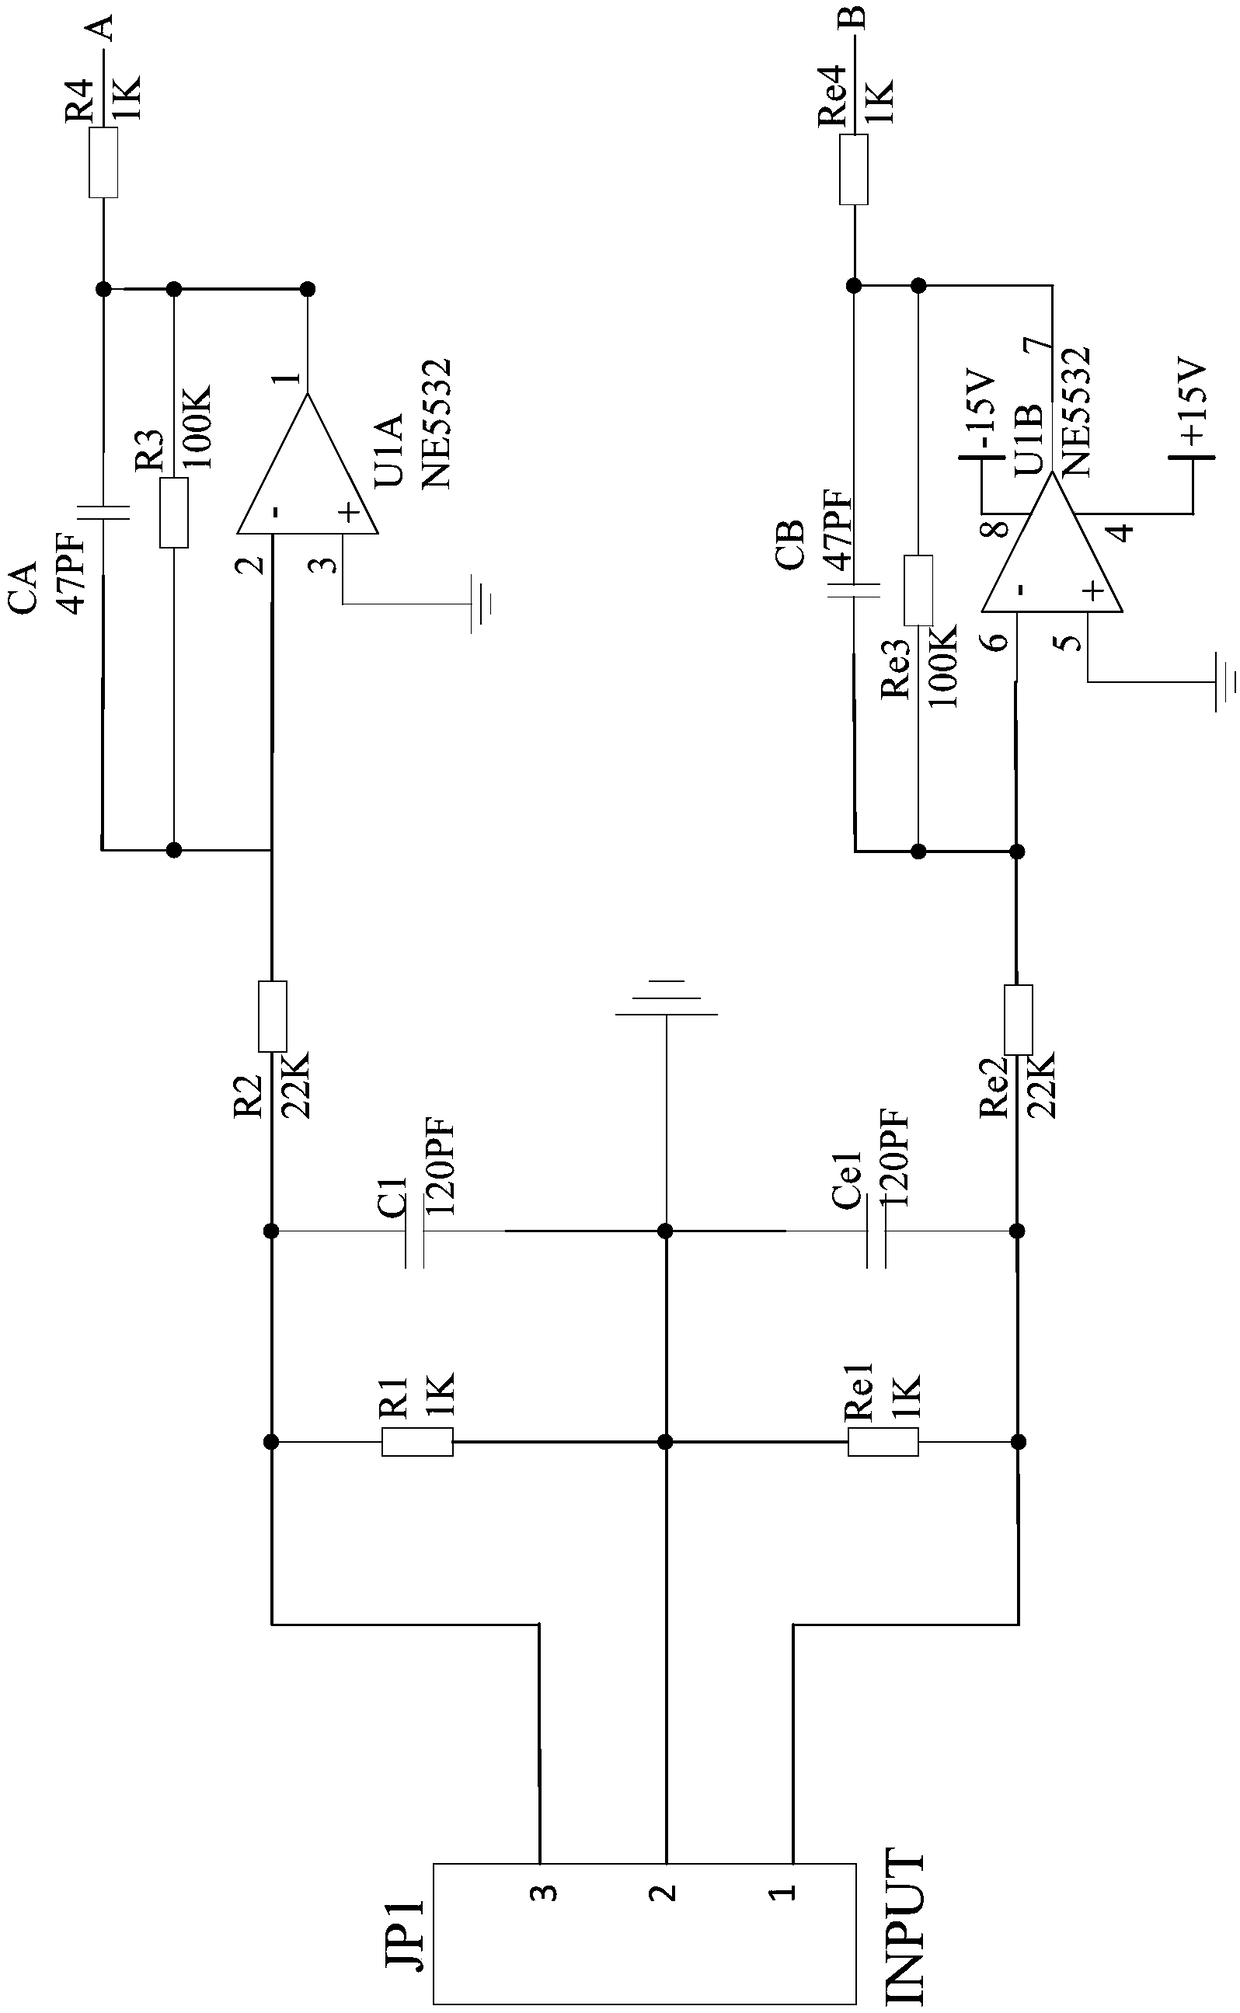 Tone regulation and control circuit based on NE5532 chip